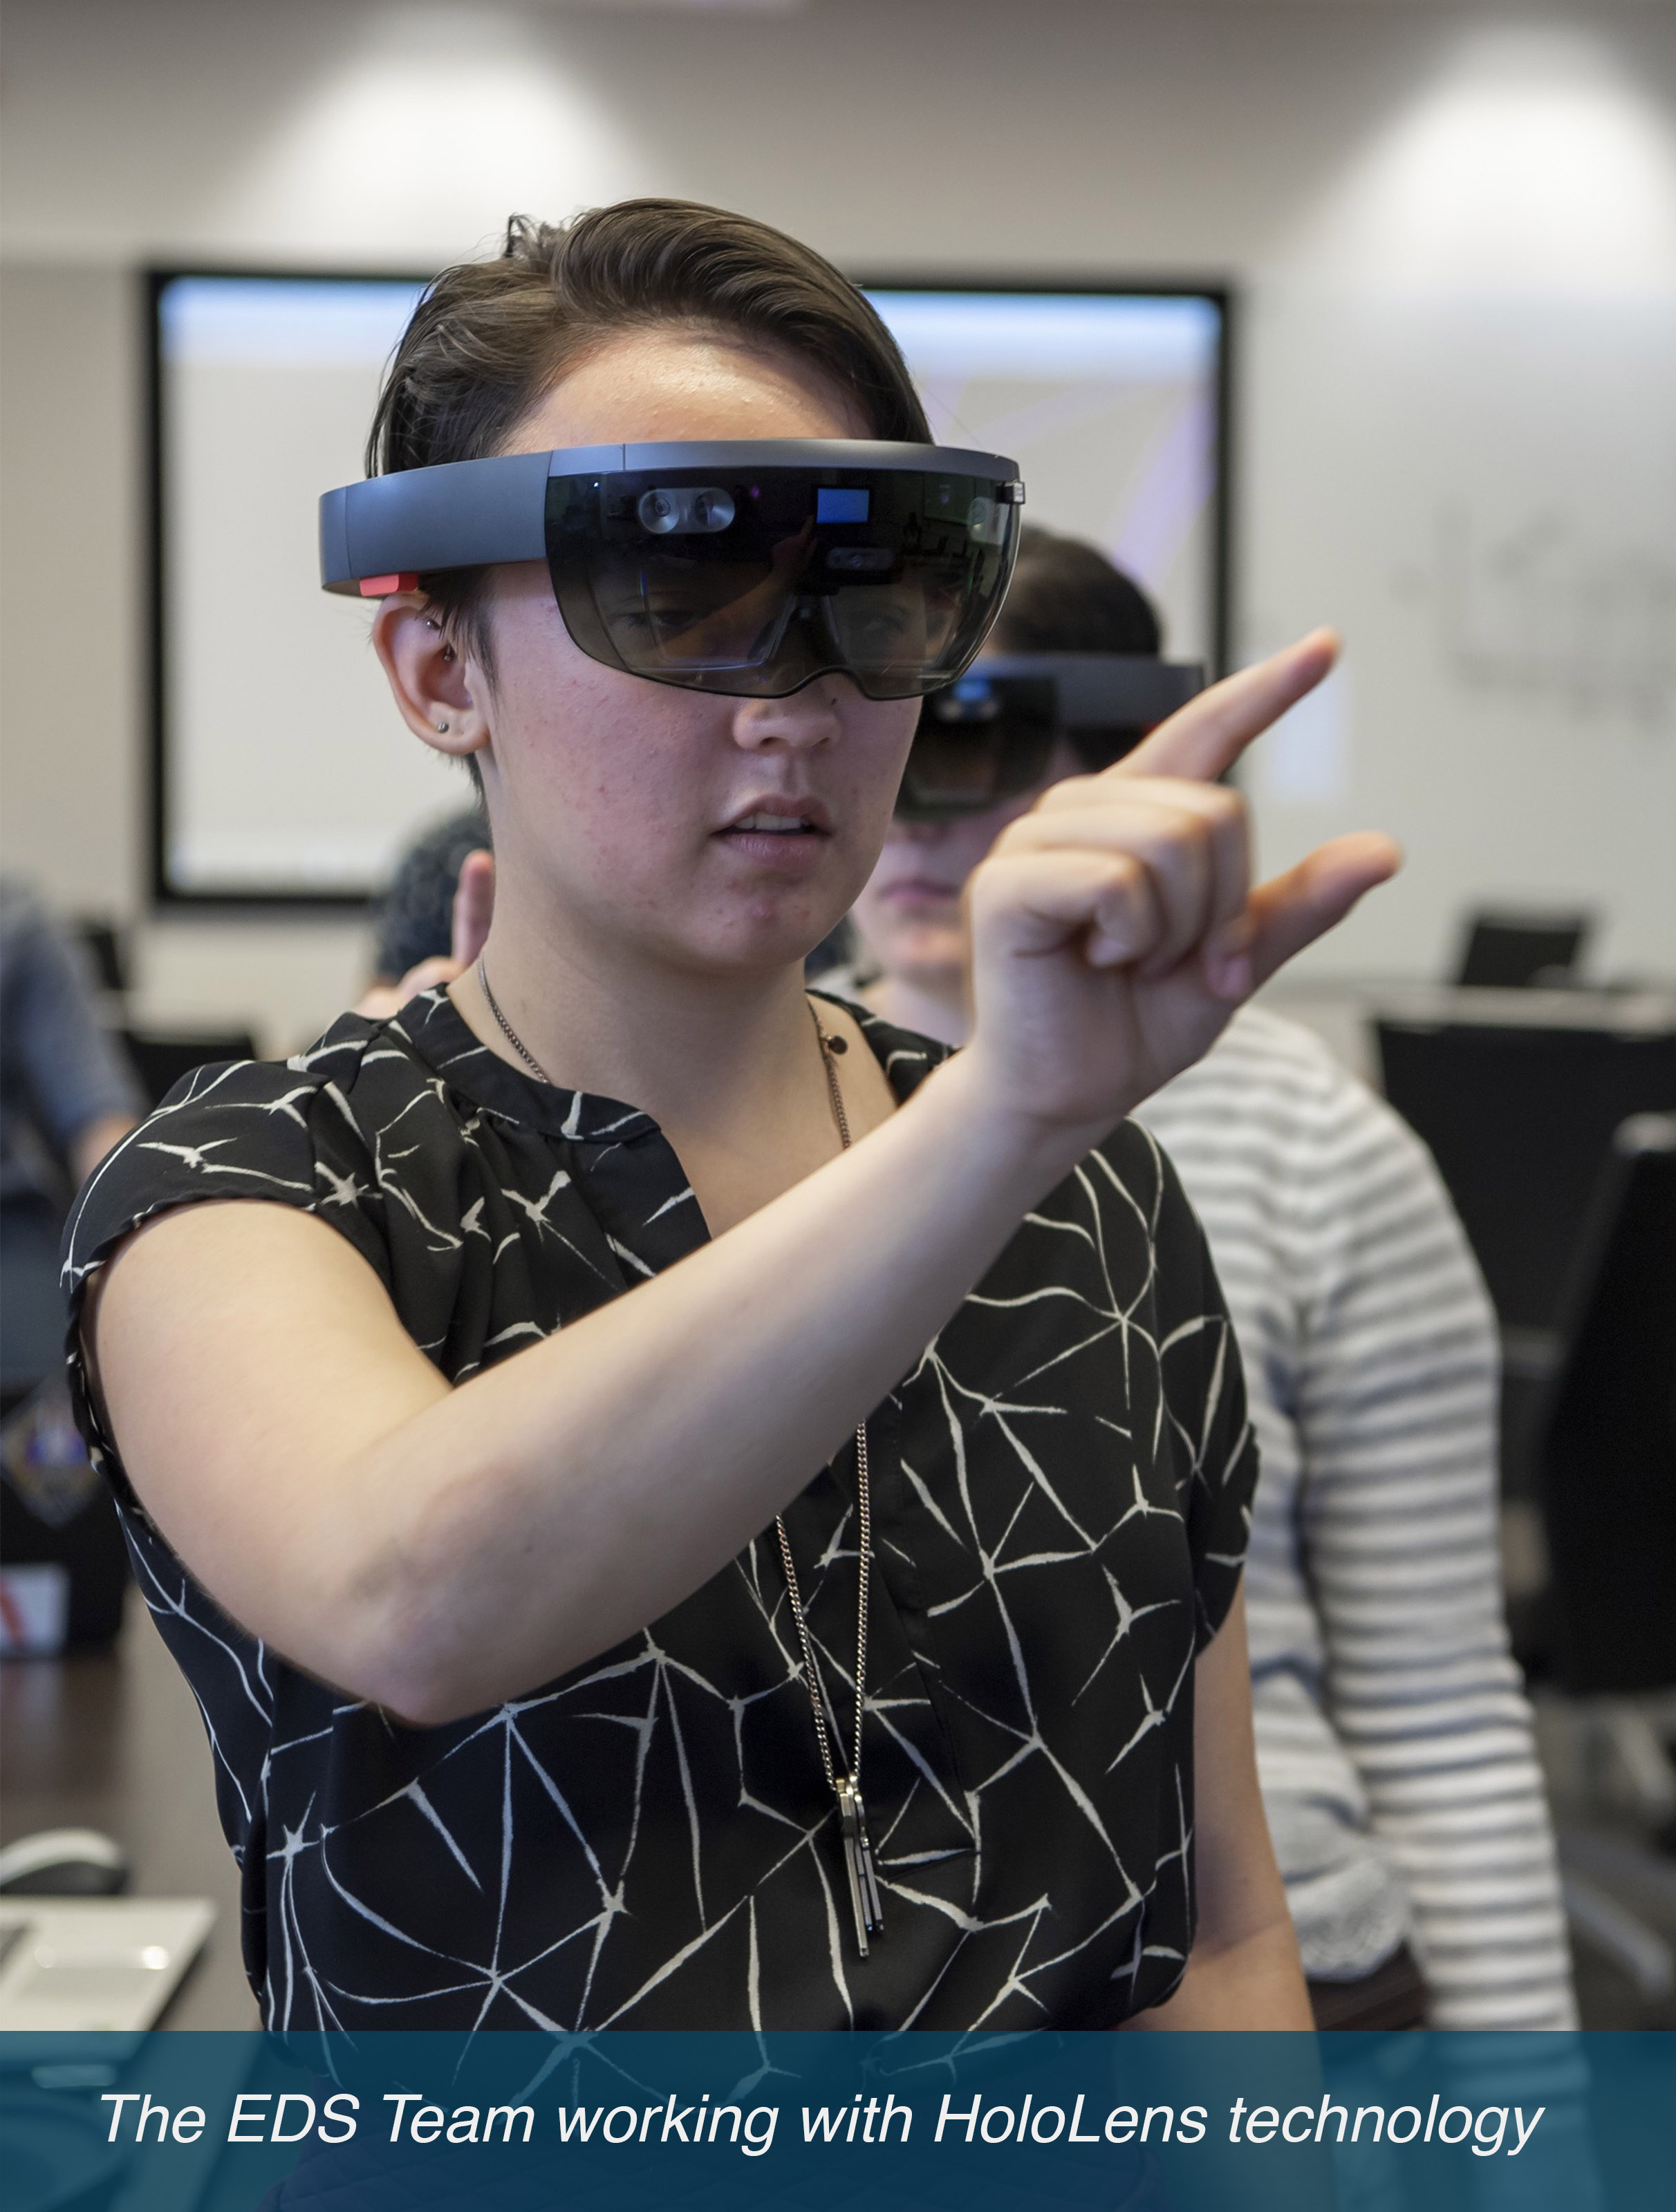 The EDS Team working with HoloLens technology